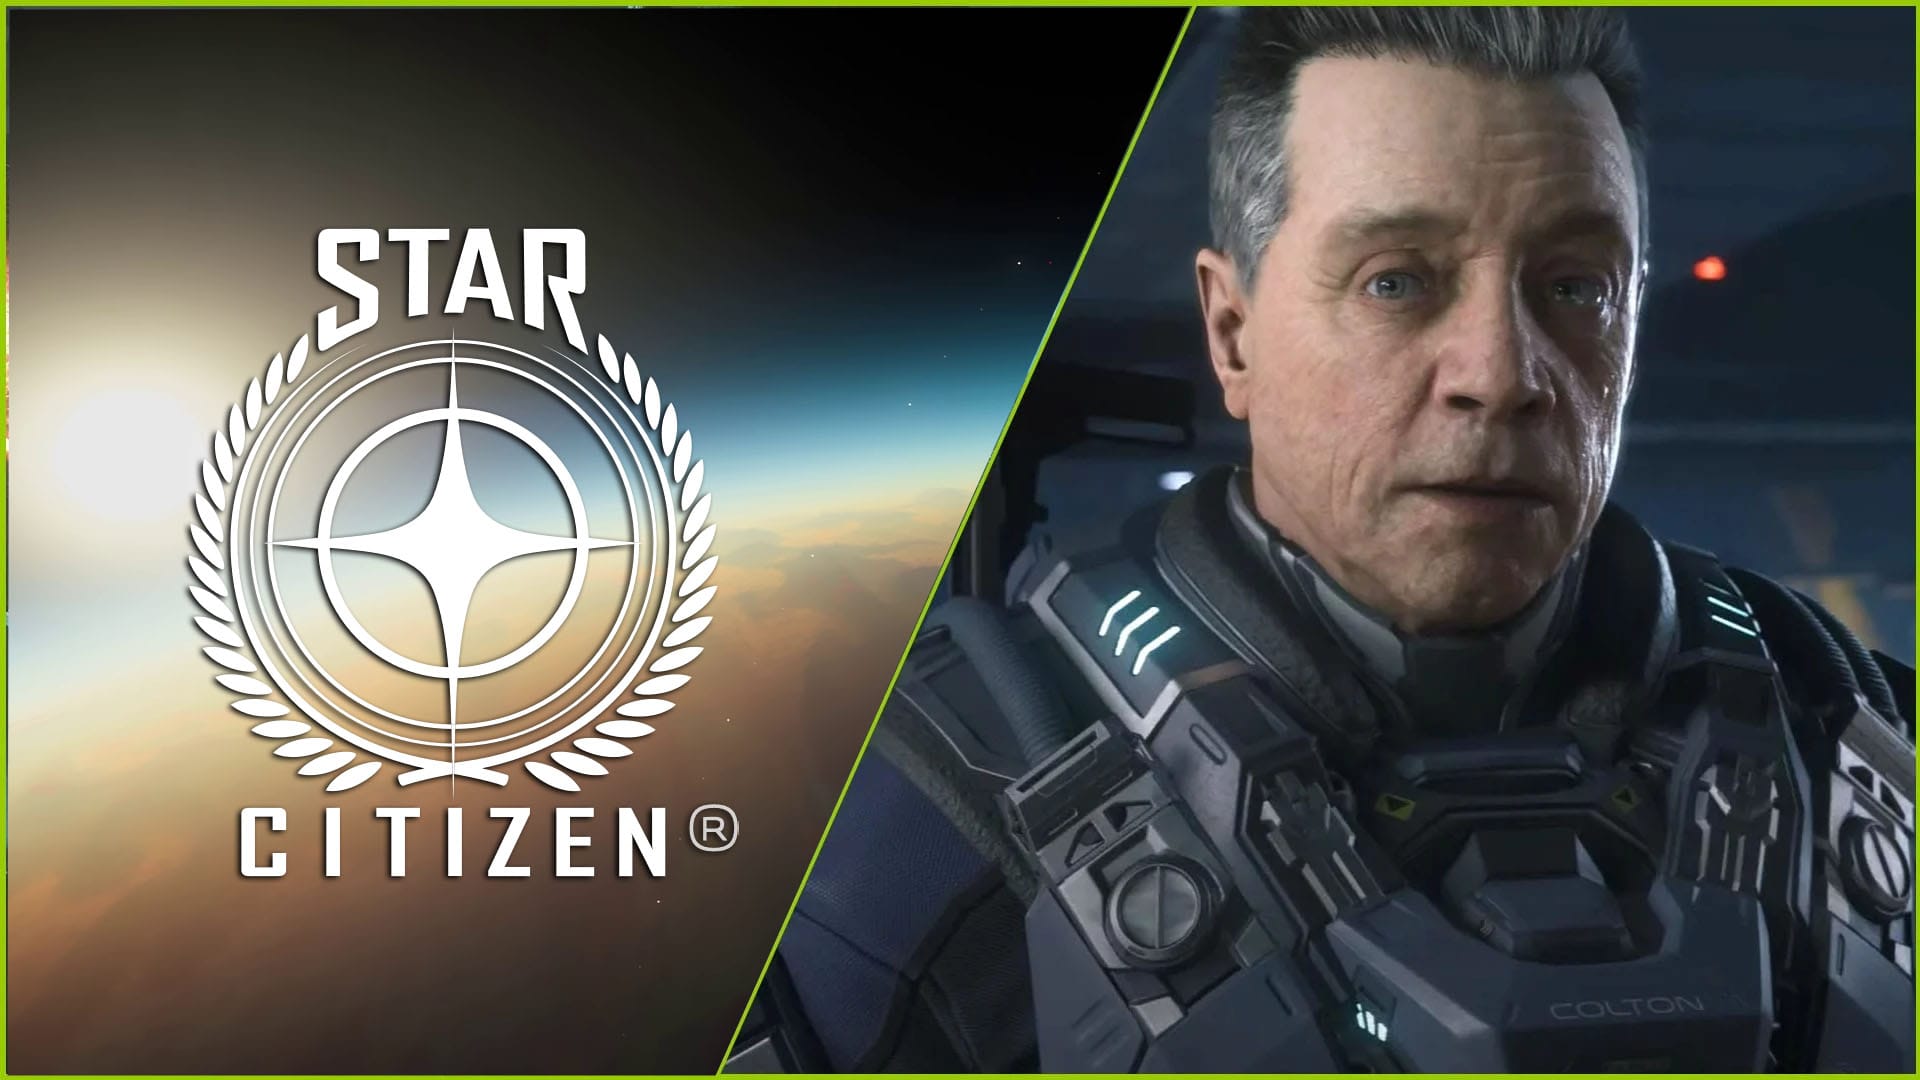 Star Citizen Just Achieved Its Biggest Crowdfunding Year Ever and 6 Years of Growth